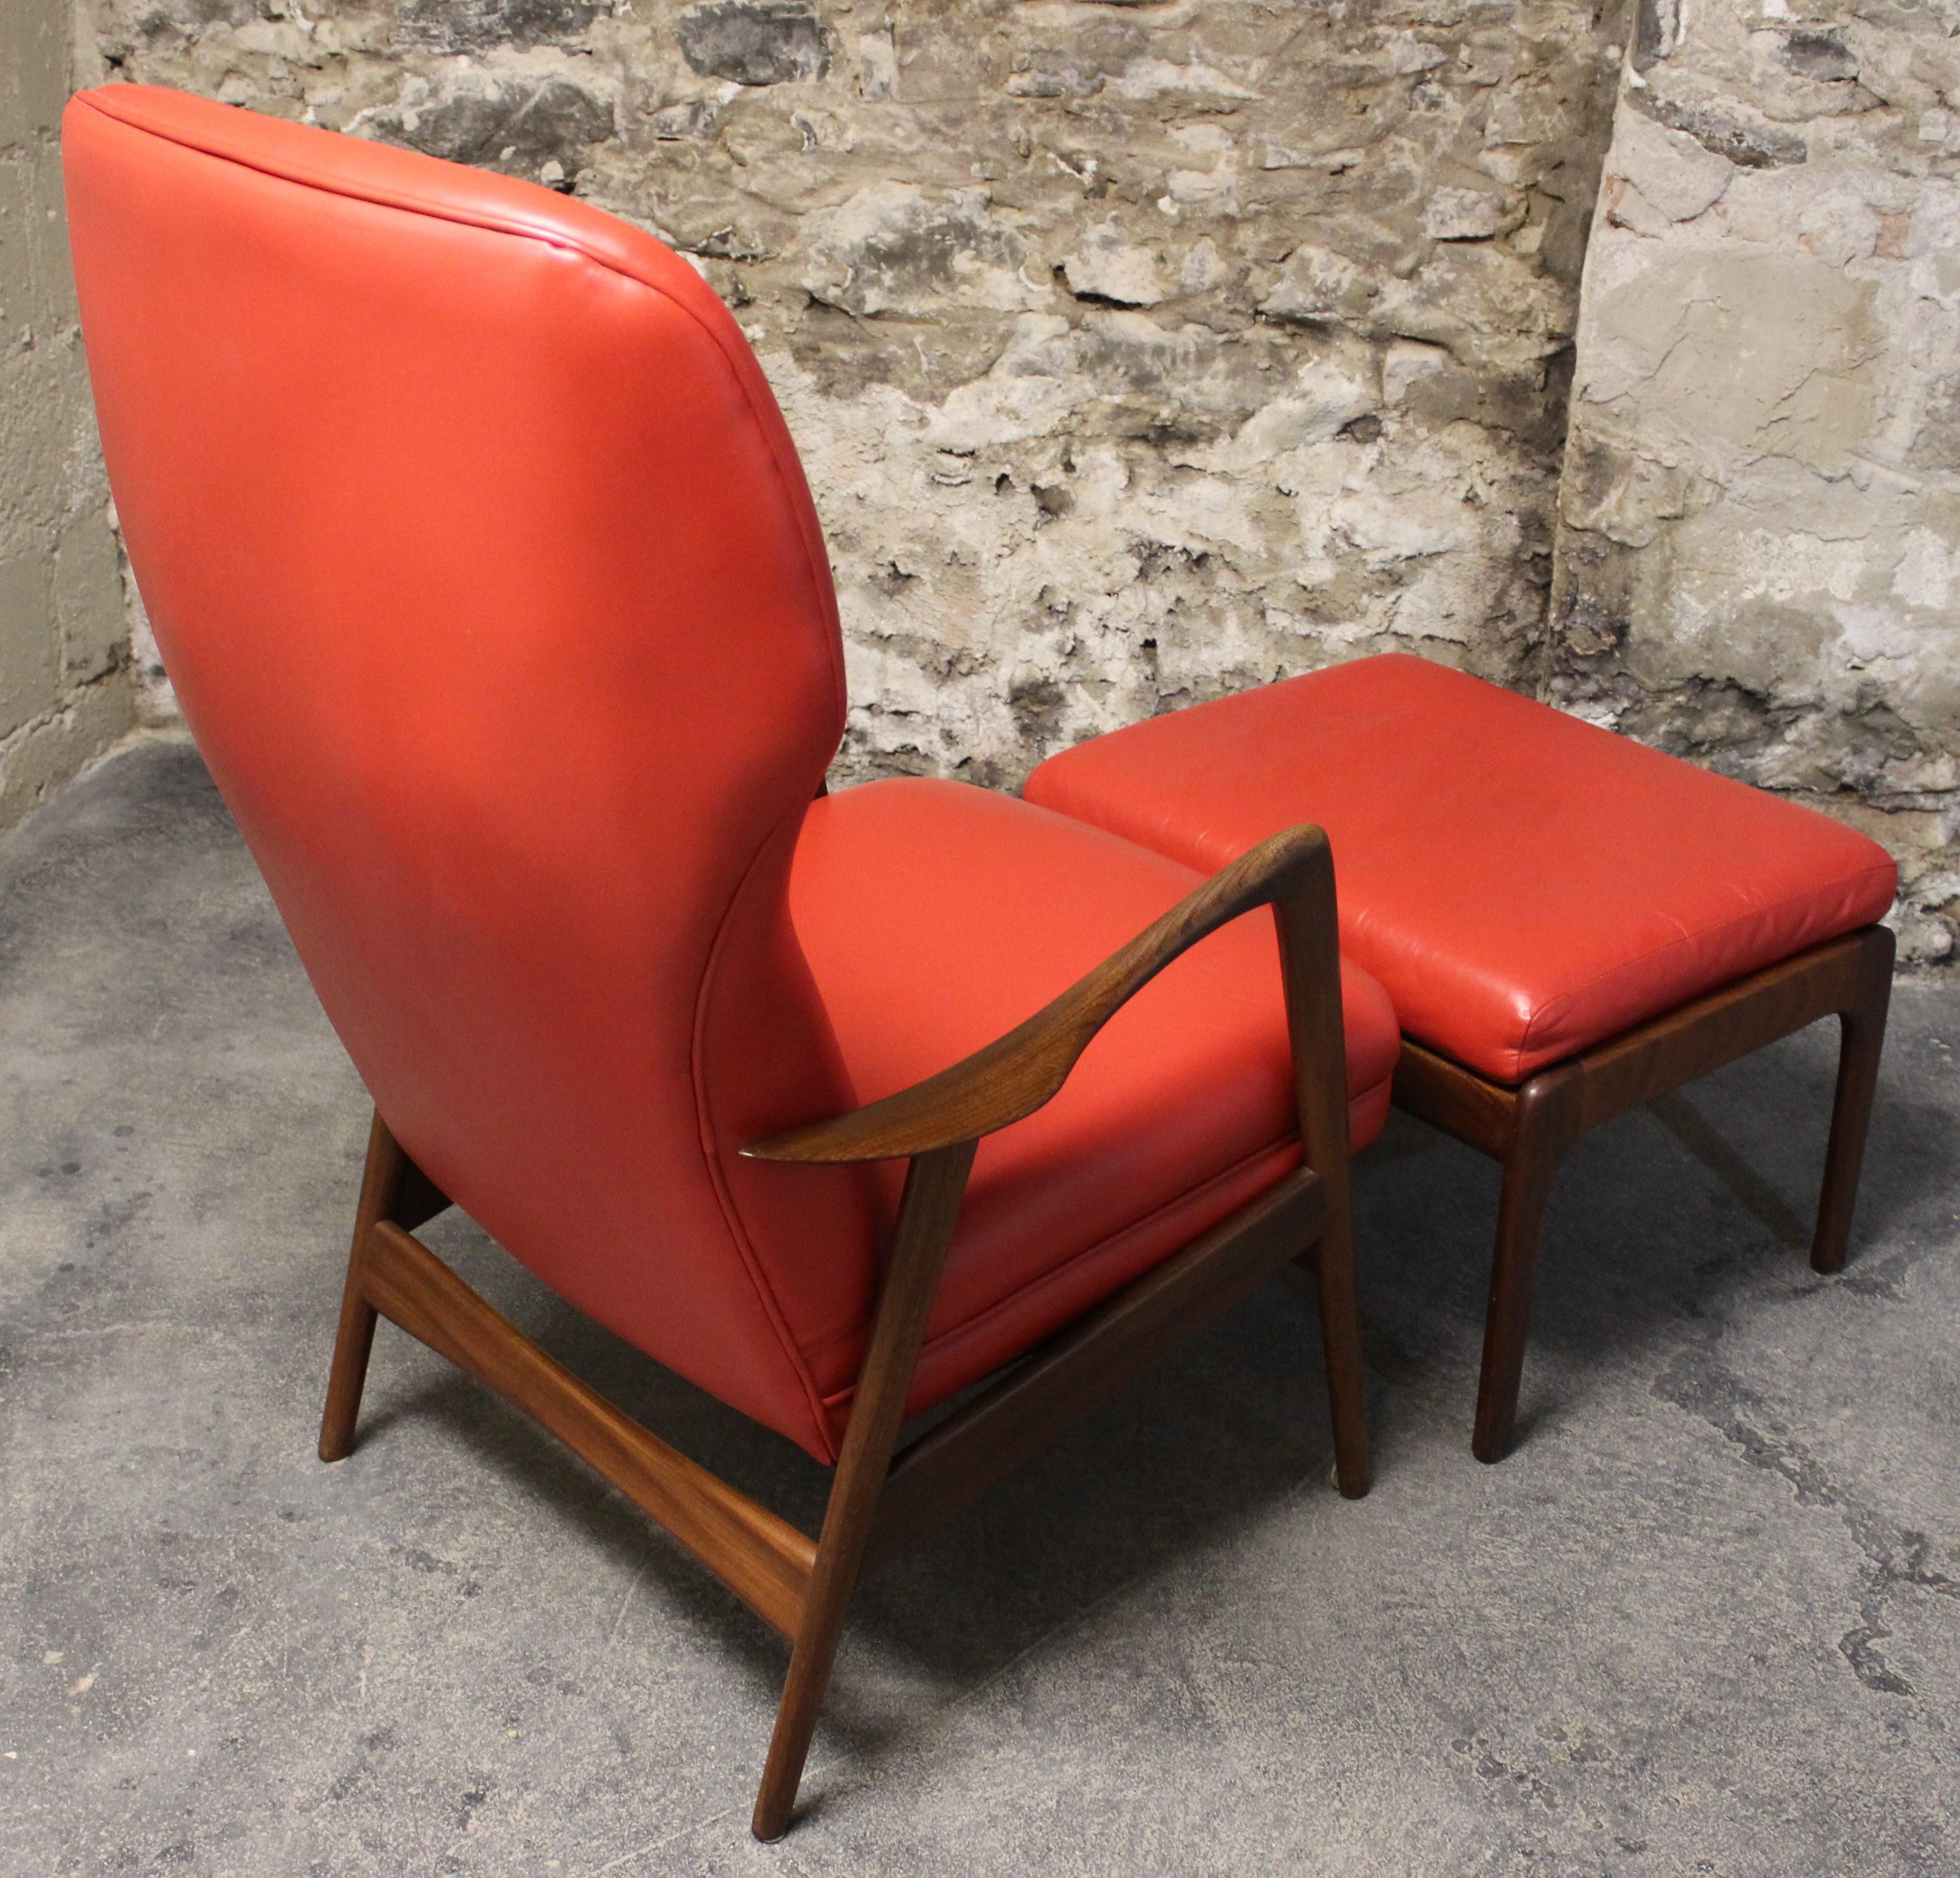 20th Century Teak Wingback Lounge Chair for Westnofa by Ingmar Relling